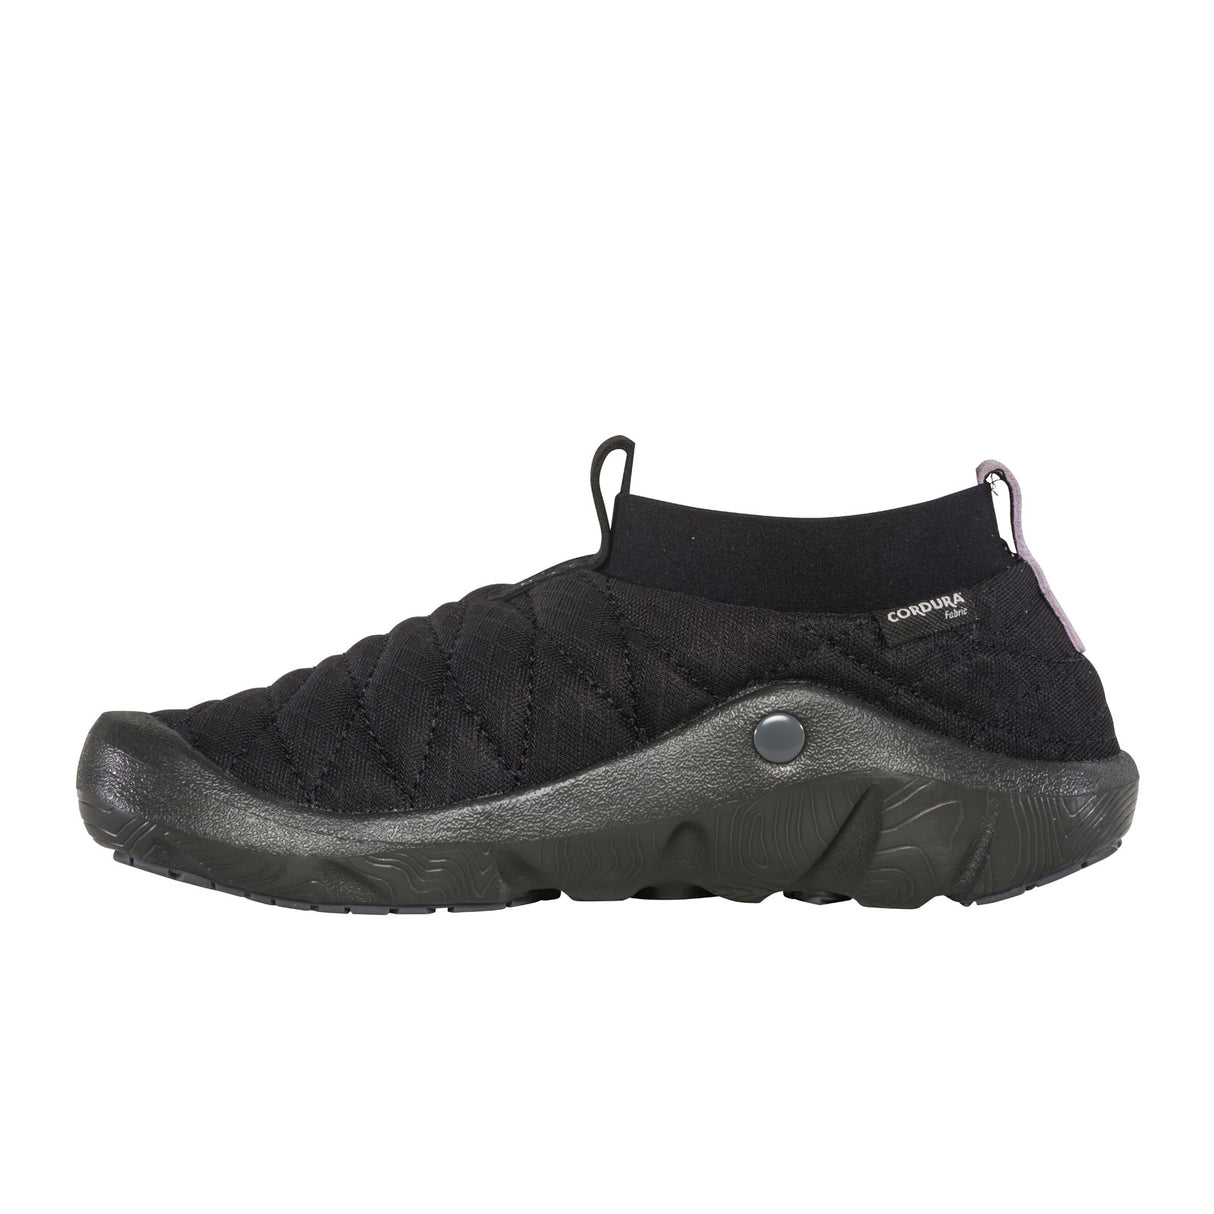 Oboz Whakata Puffy Pull On Moc (Men) - Black Sea Boots - Casual - Low - The Heel Shoe Fitters